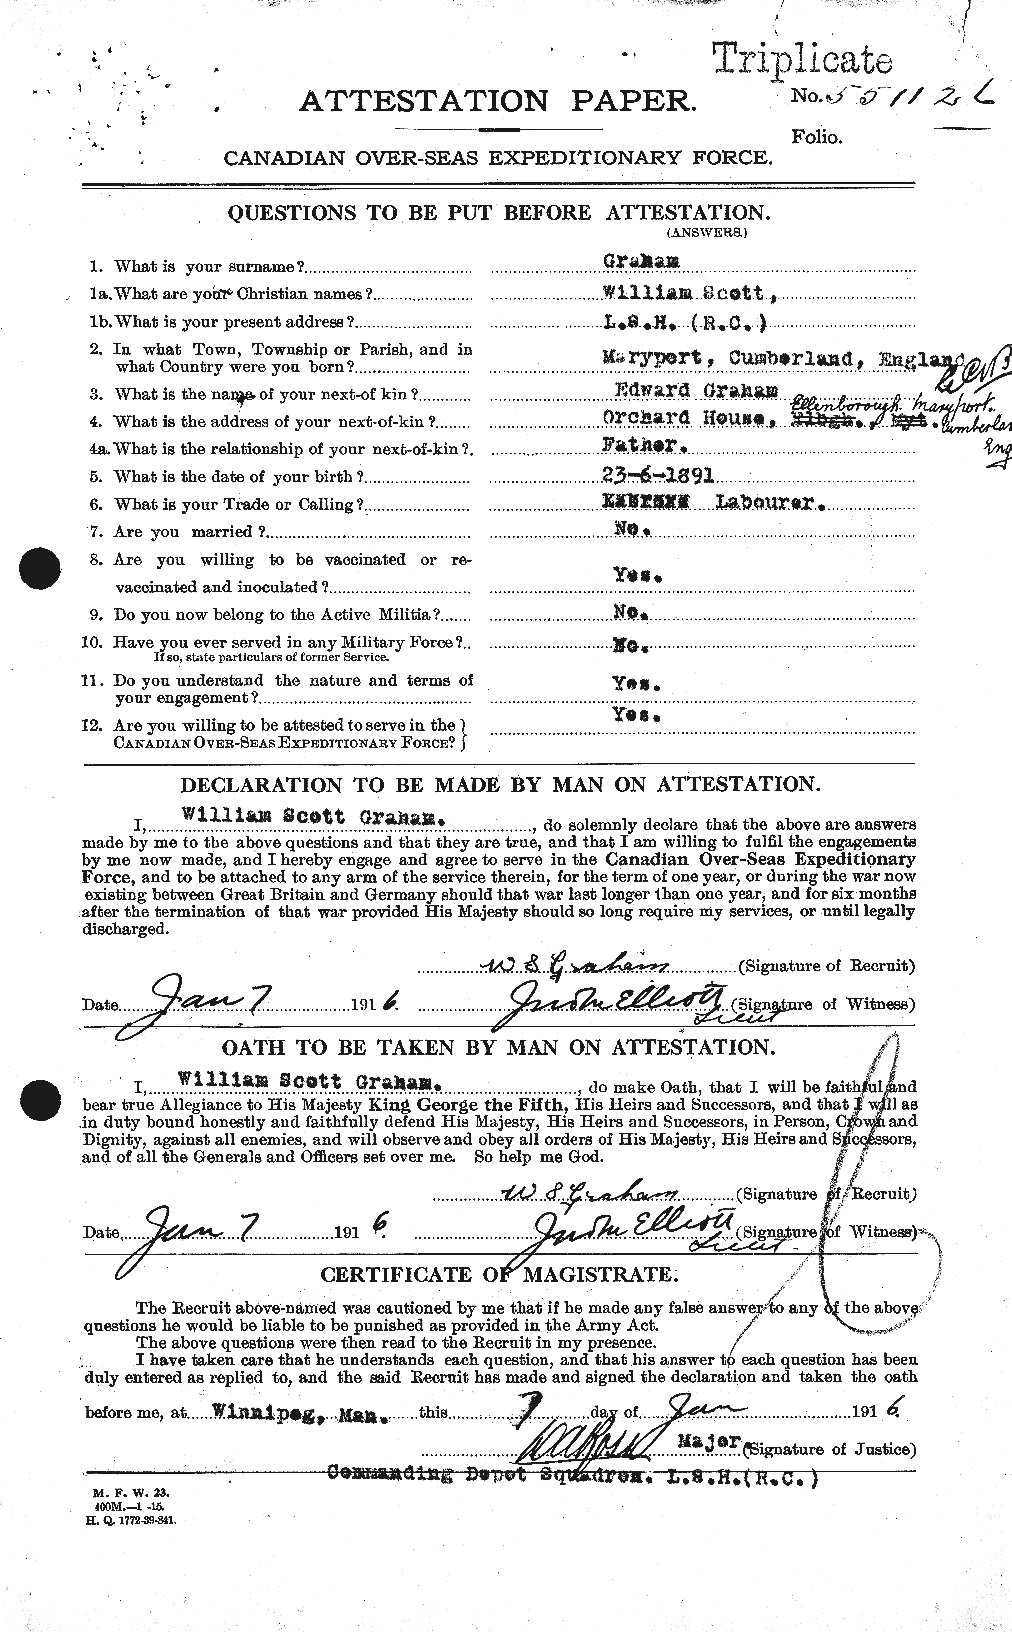 Personnel Records of the First World War - CEF 358040a